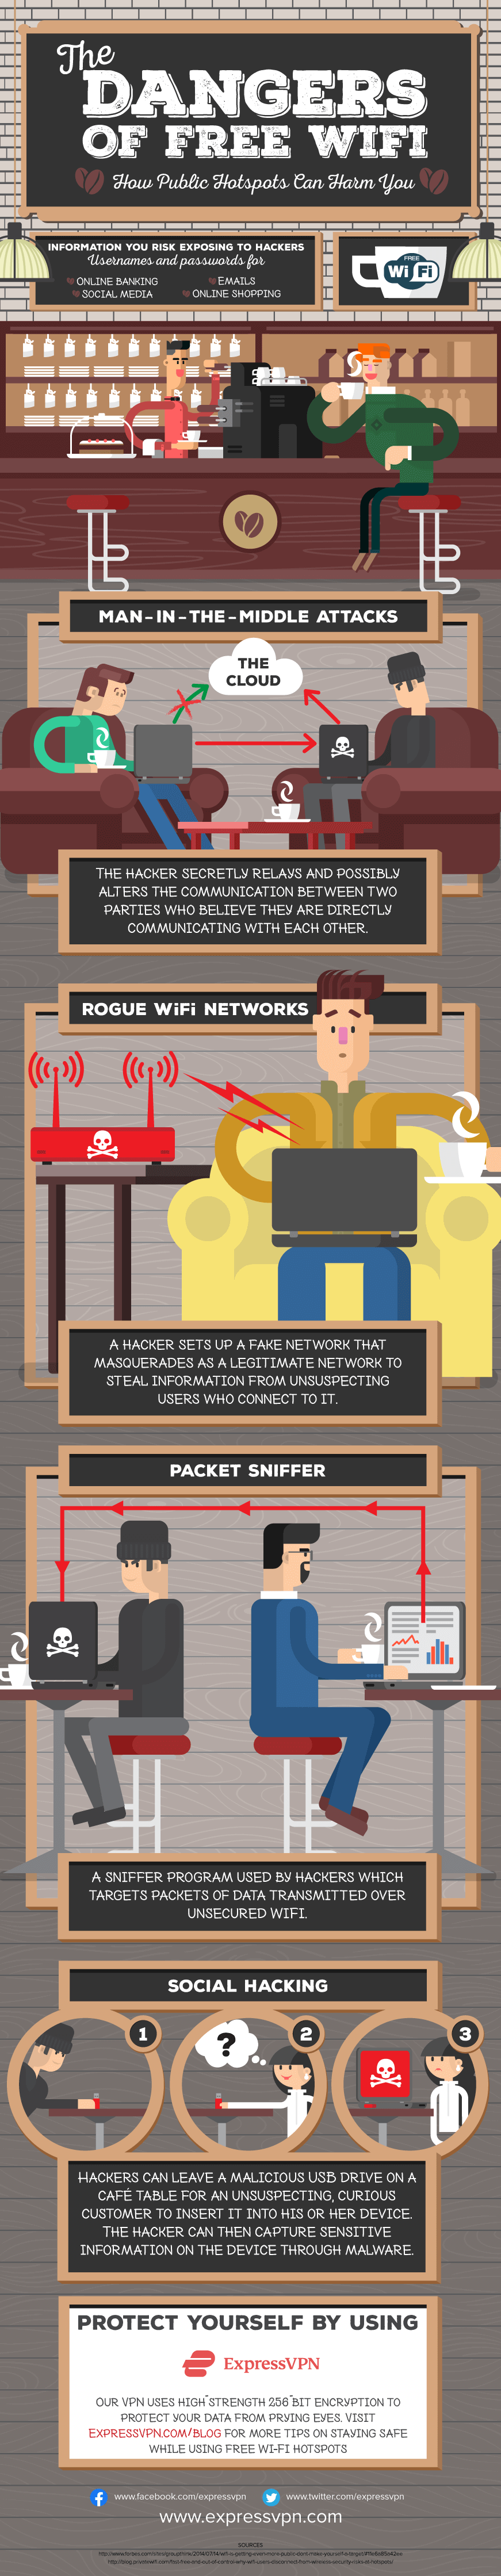 dangers-of-free-wifi-infographic